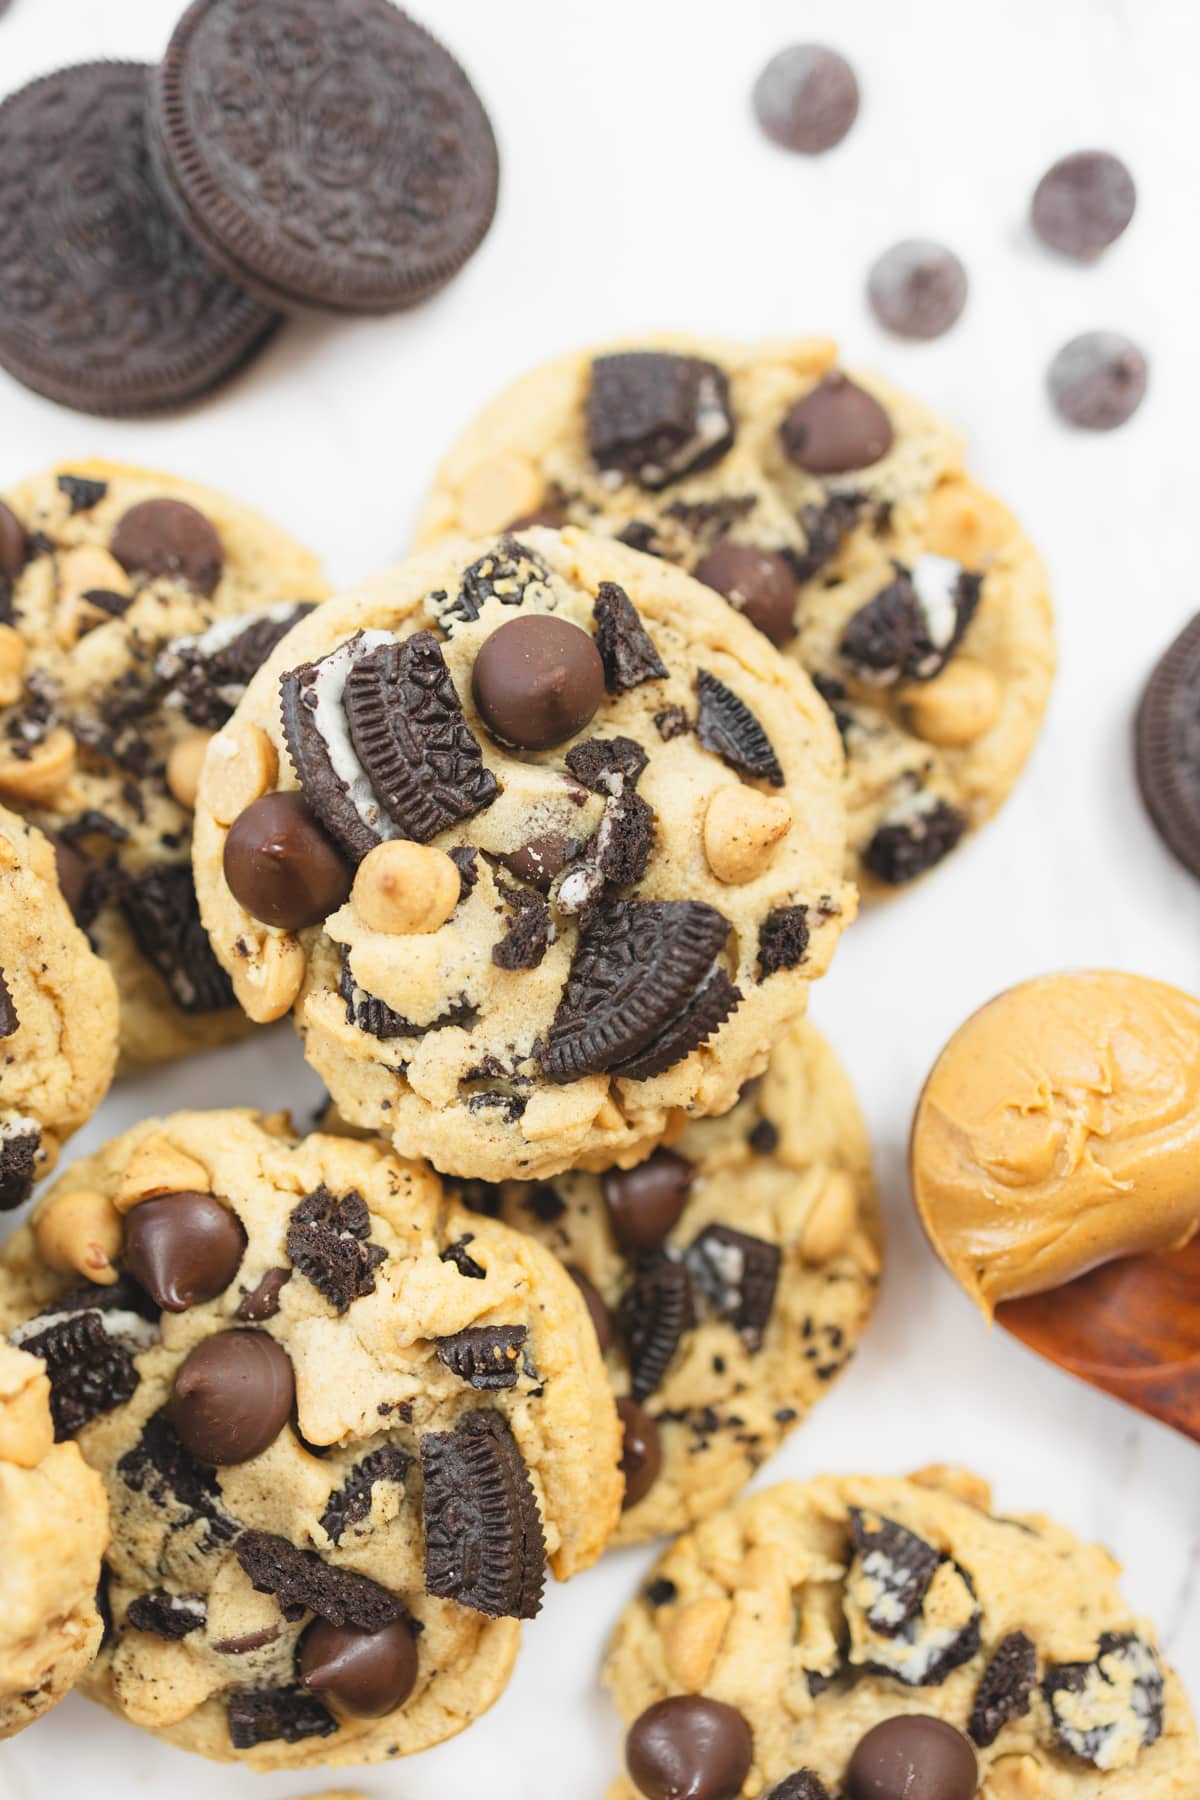 Top view of Peanut Butter Oreo Cookies on a white surface, surrounded by oreo cookies, chocolate chips, and a spoon with peanut butter in it.